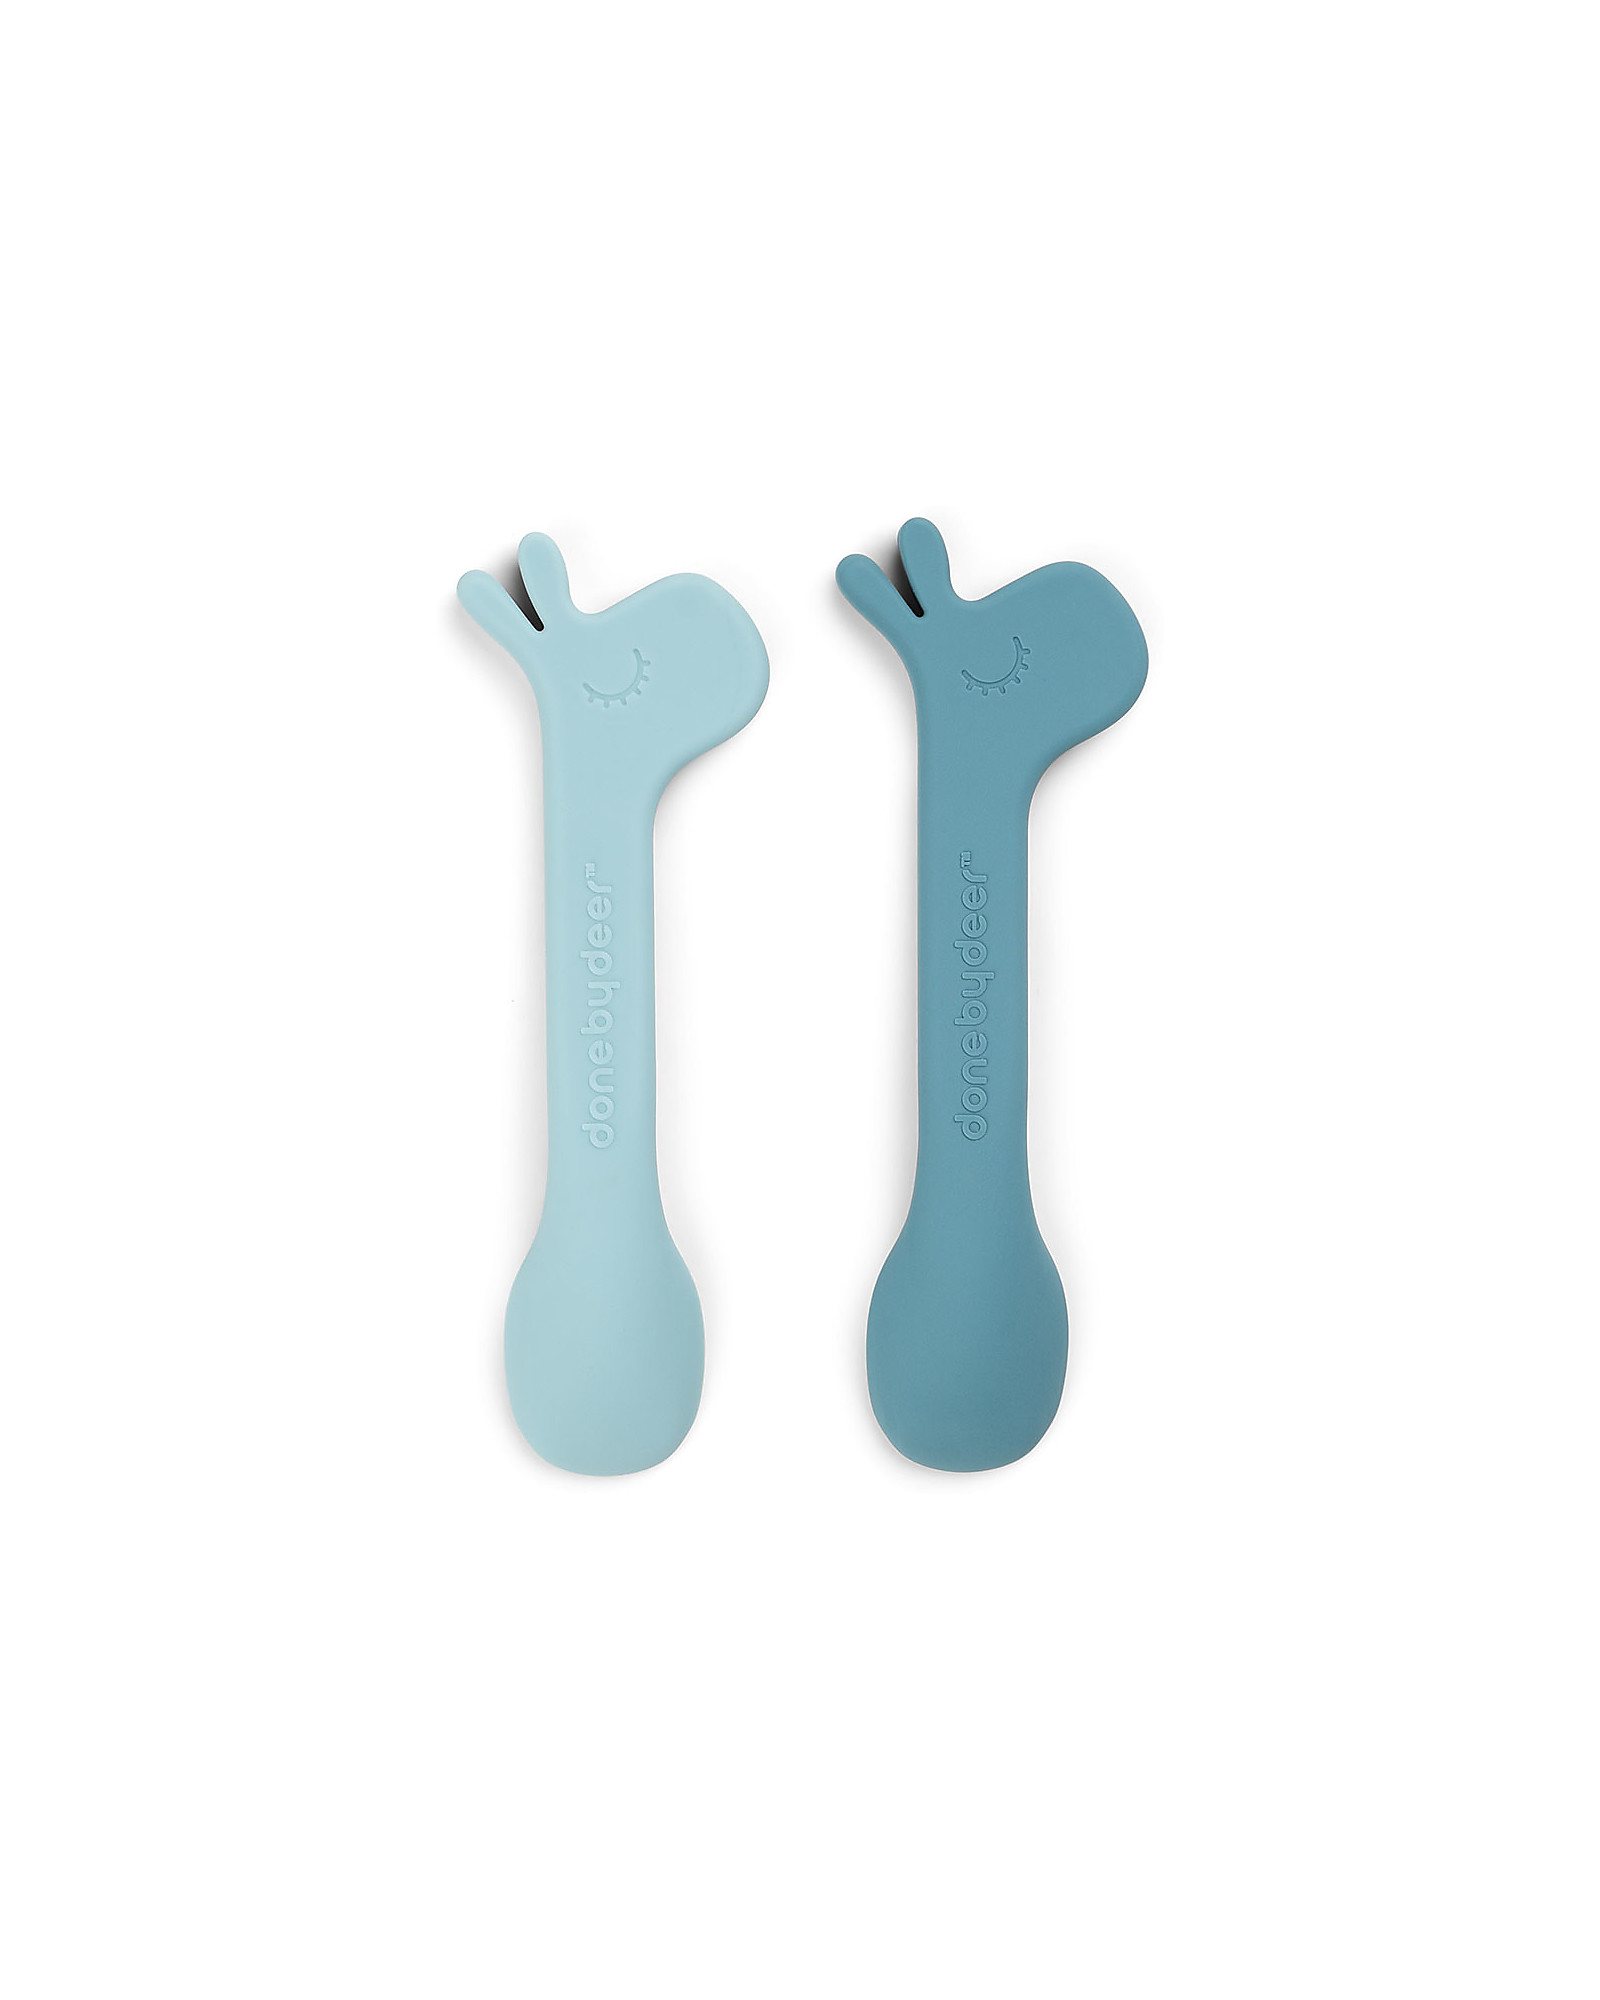 https://data.family-nation.com/imgprodotto/done-by-deer-silicone-baby-spoon-2-pack-lalee-blue-cutlery_469161_zoom.jpg